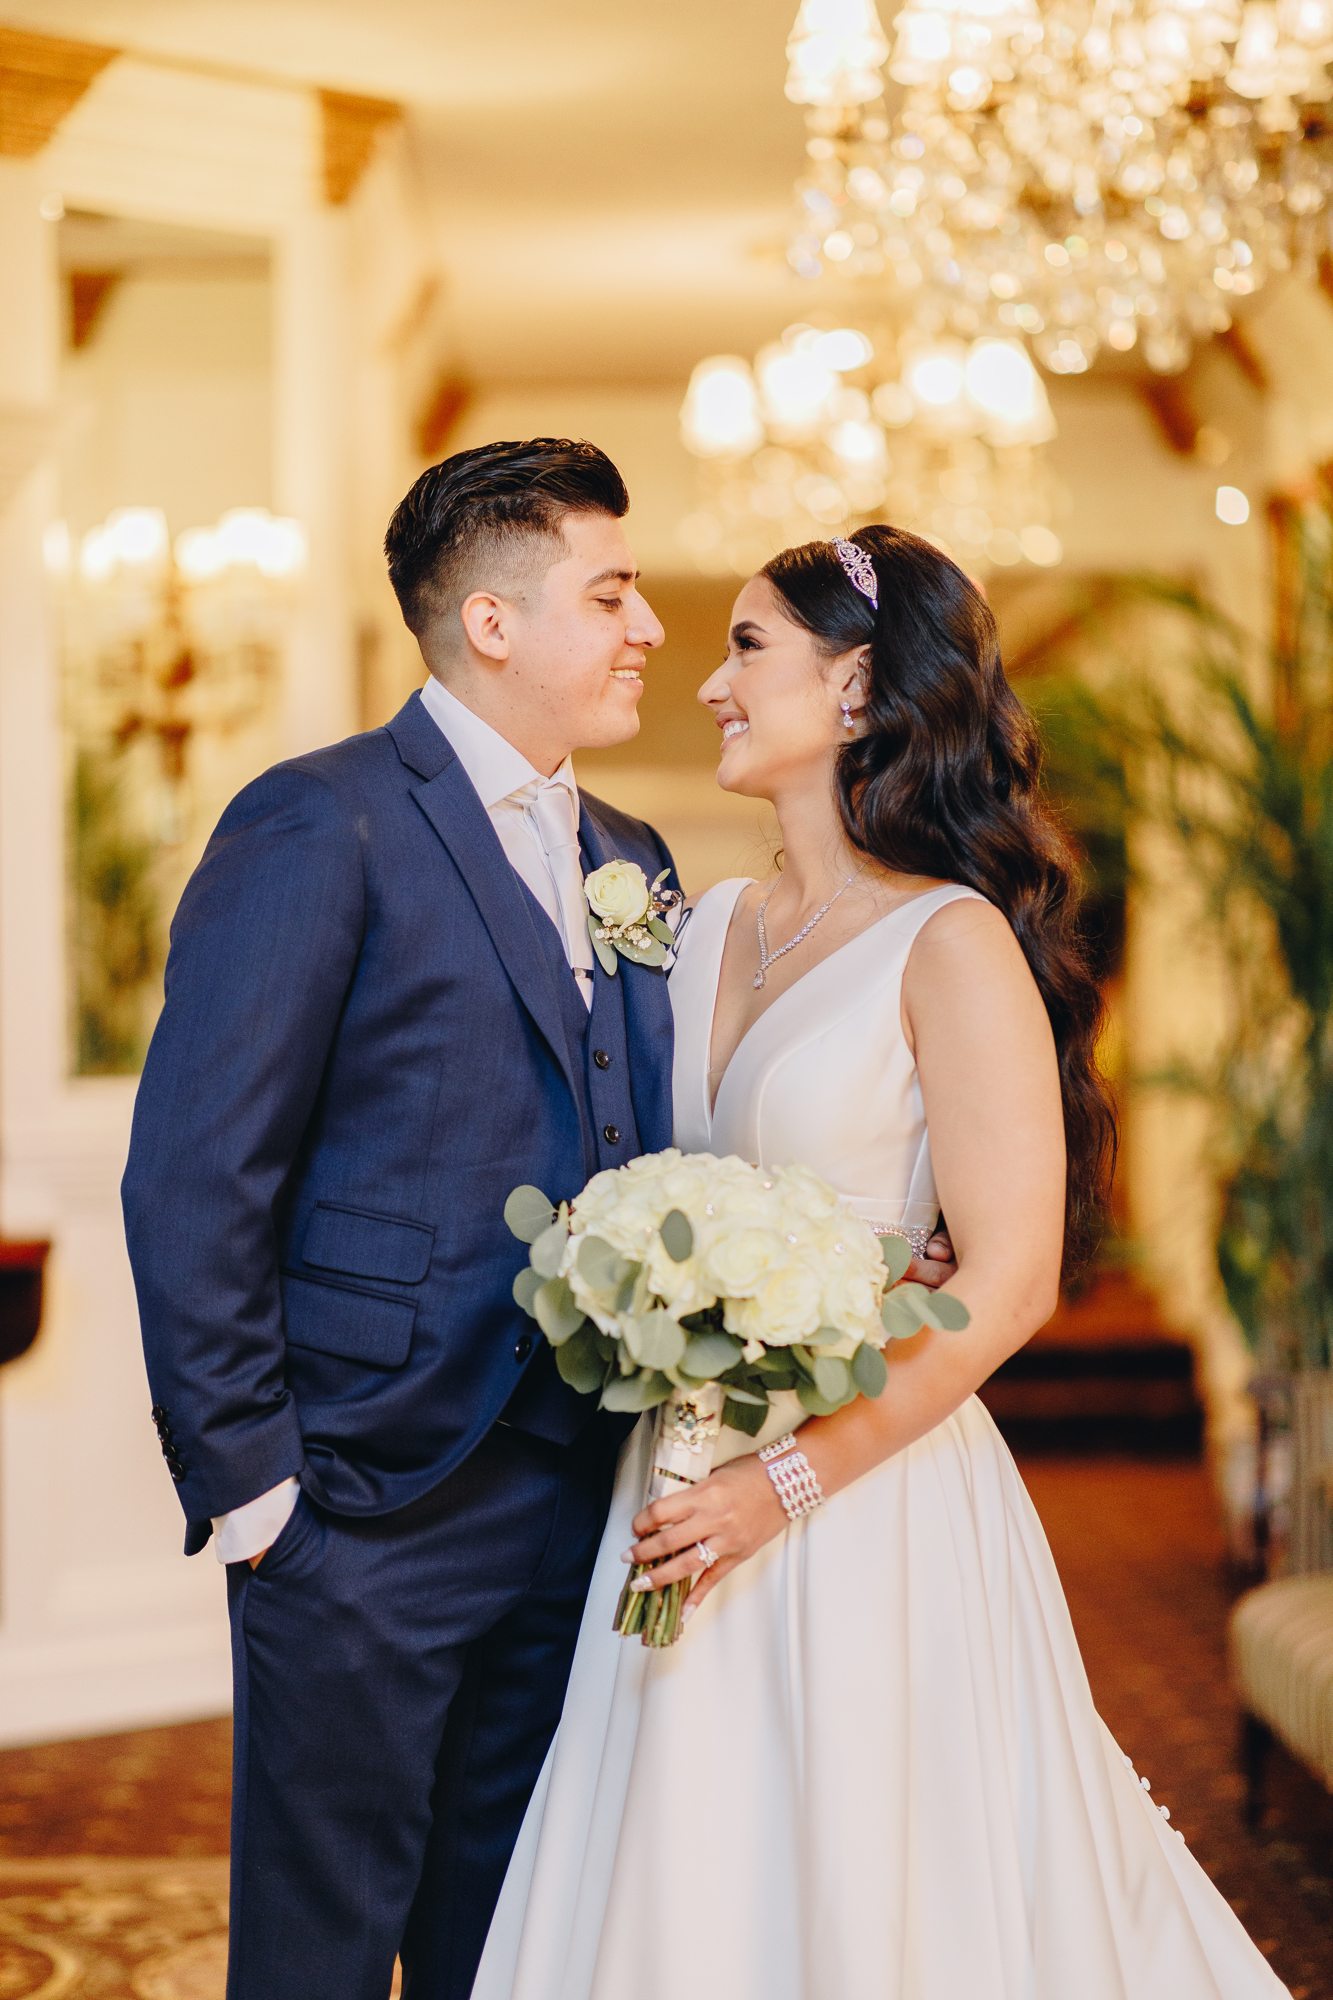 Romantic wedding photography at the Brownstone